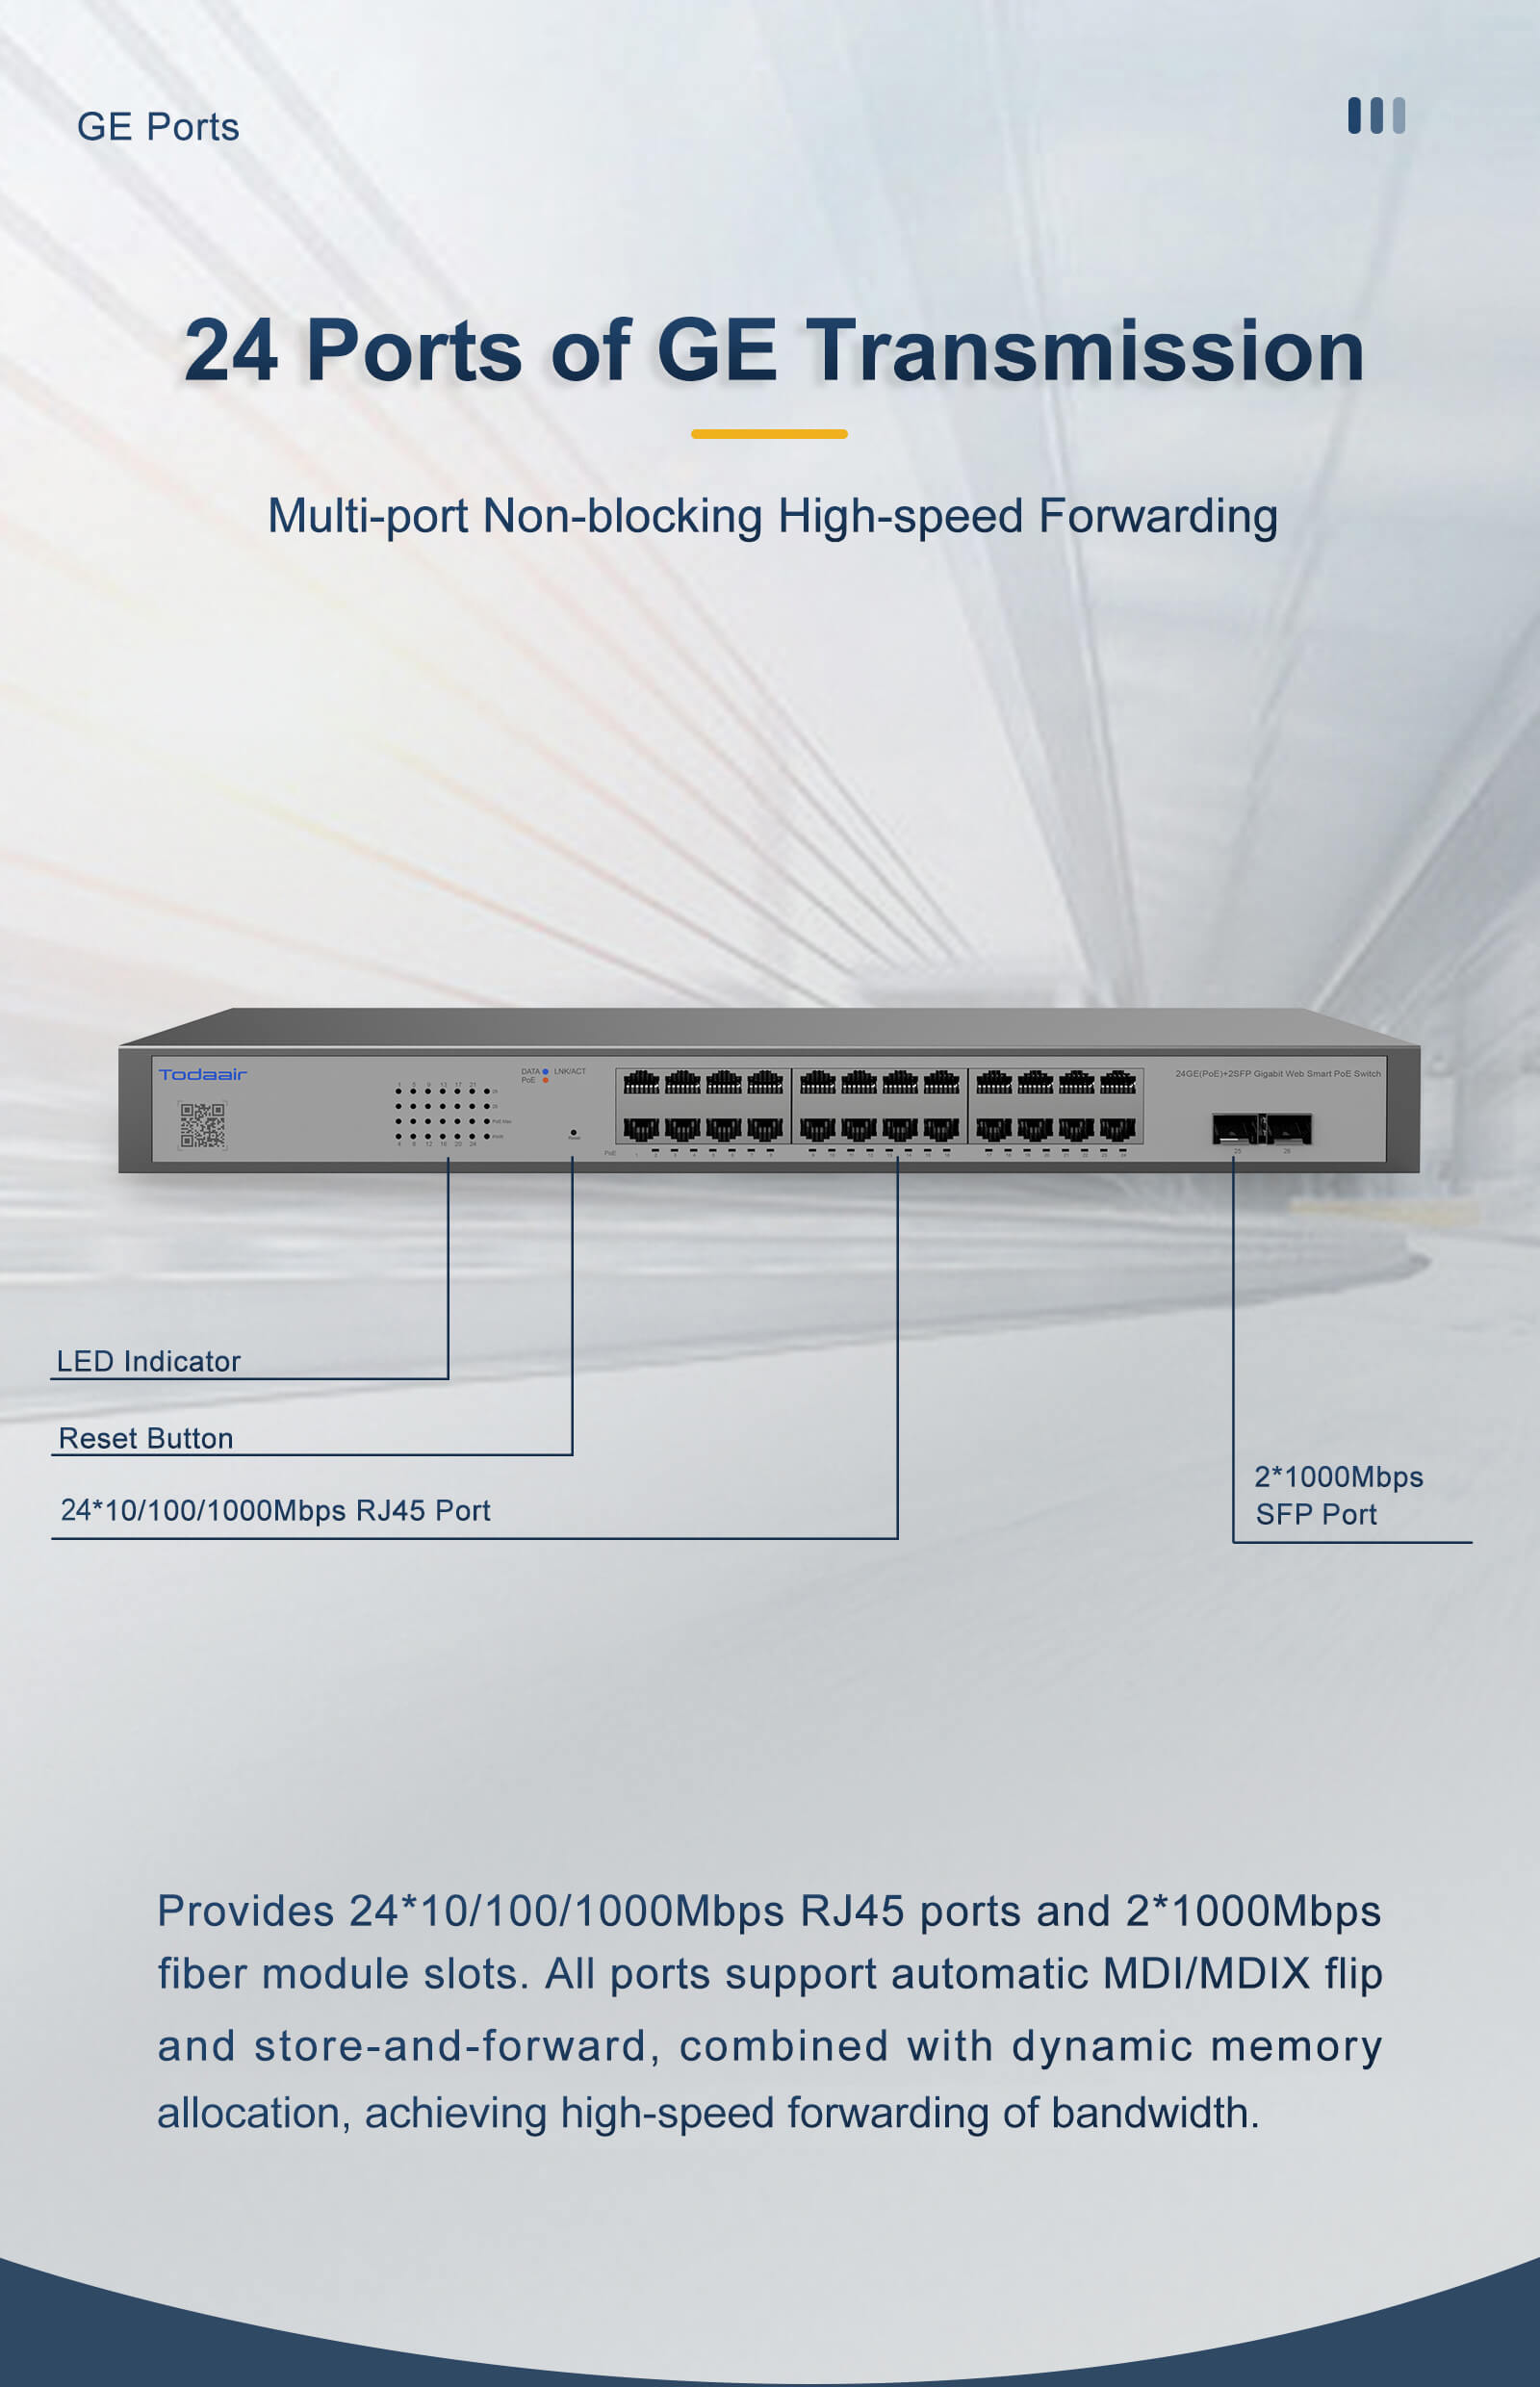 todaair 24 ports network switch GE transmission